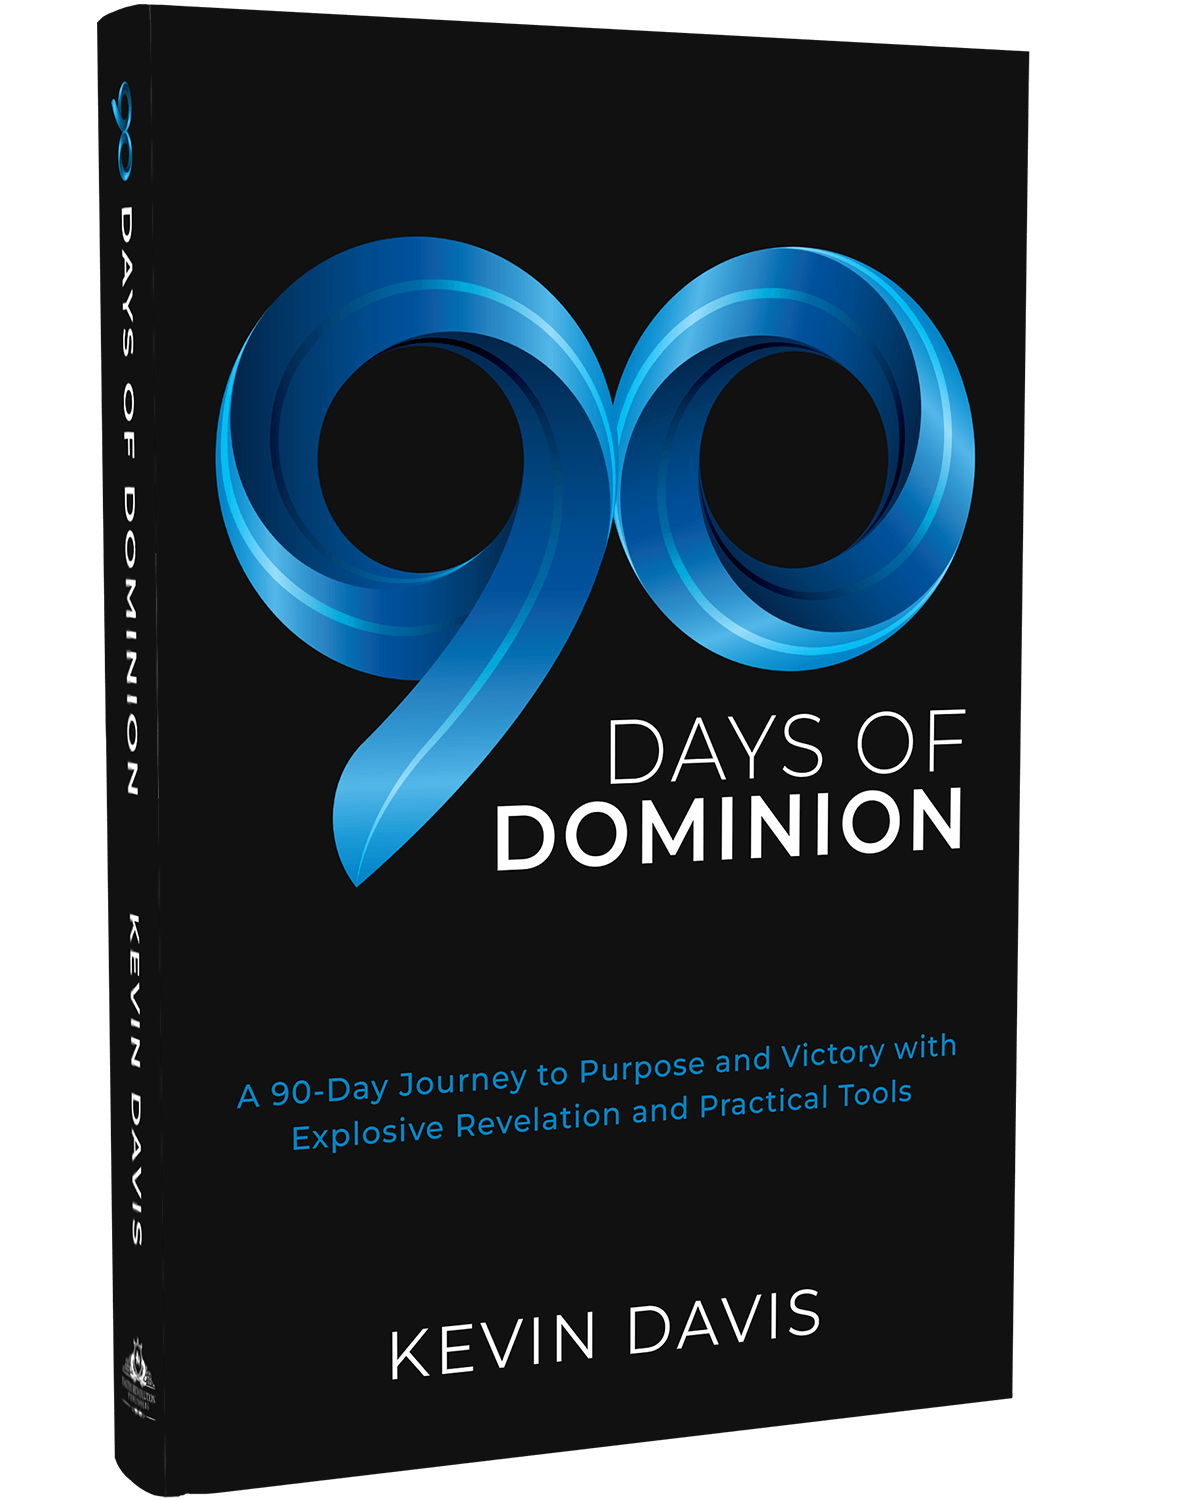 90 Days of Dominion, Book by Kevin Davis